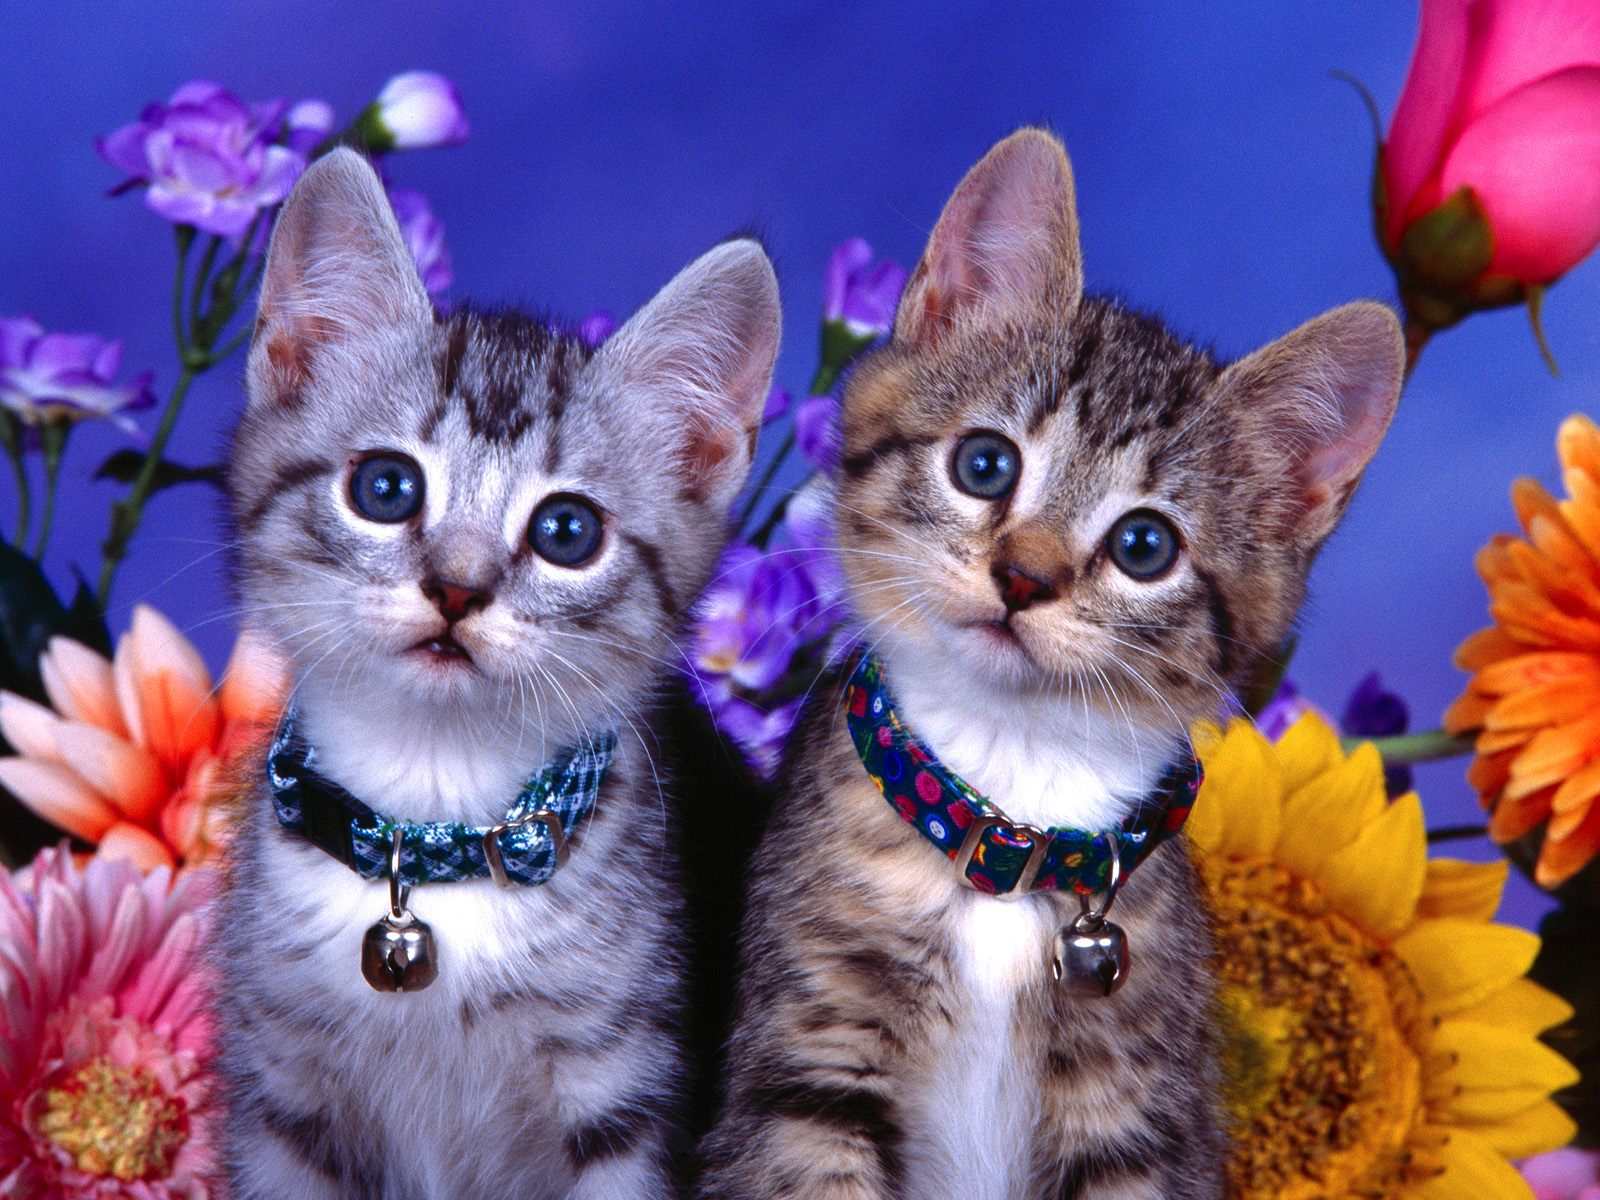 Wallpapers He Wallpapers: cute cats wallpapers